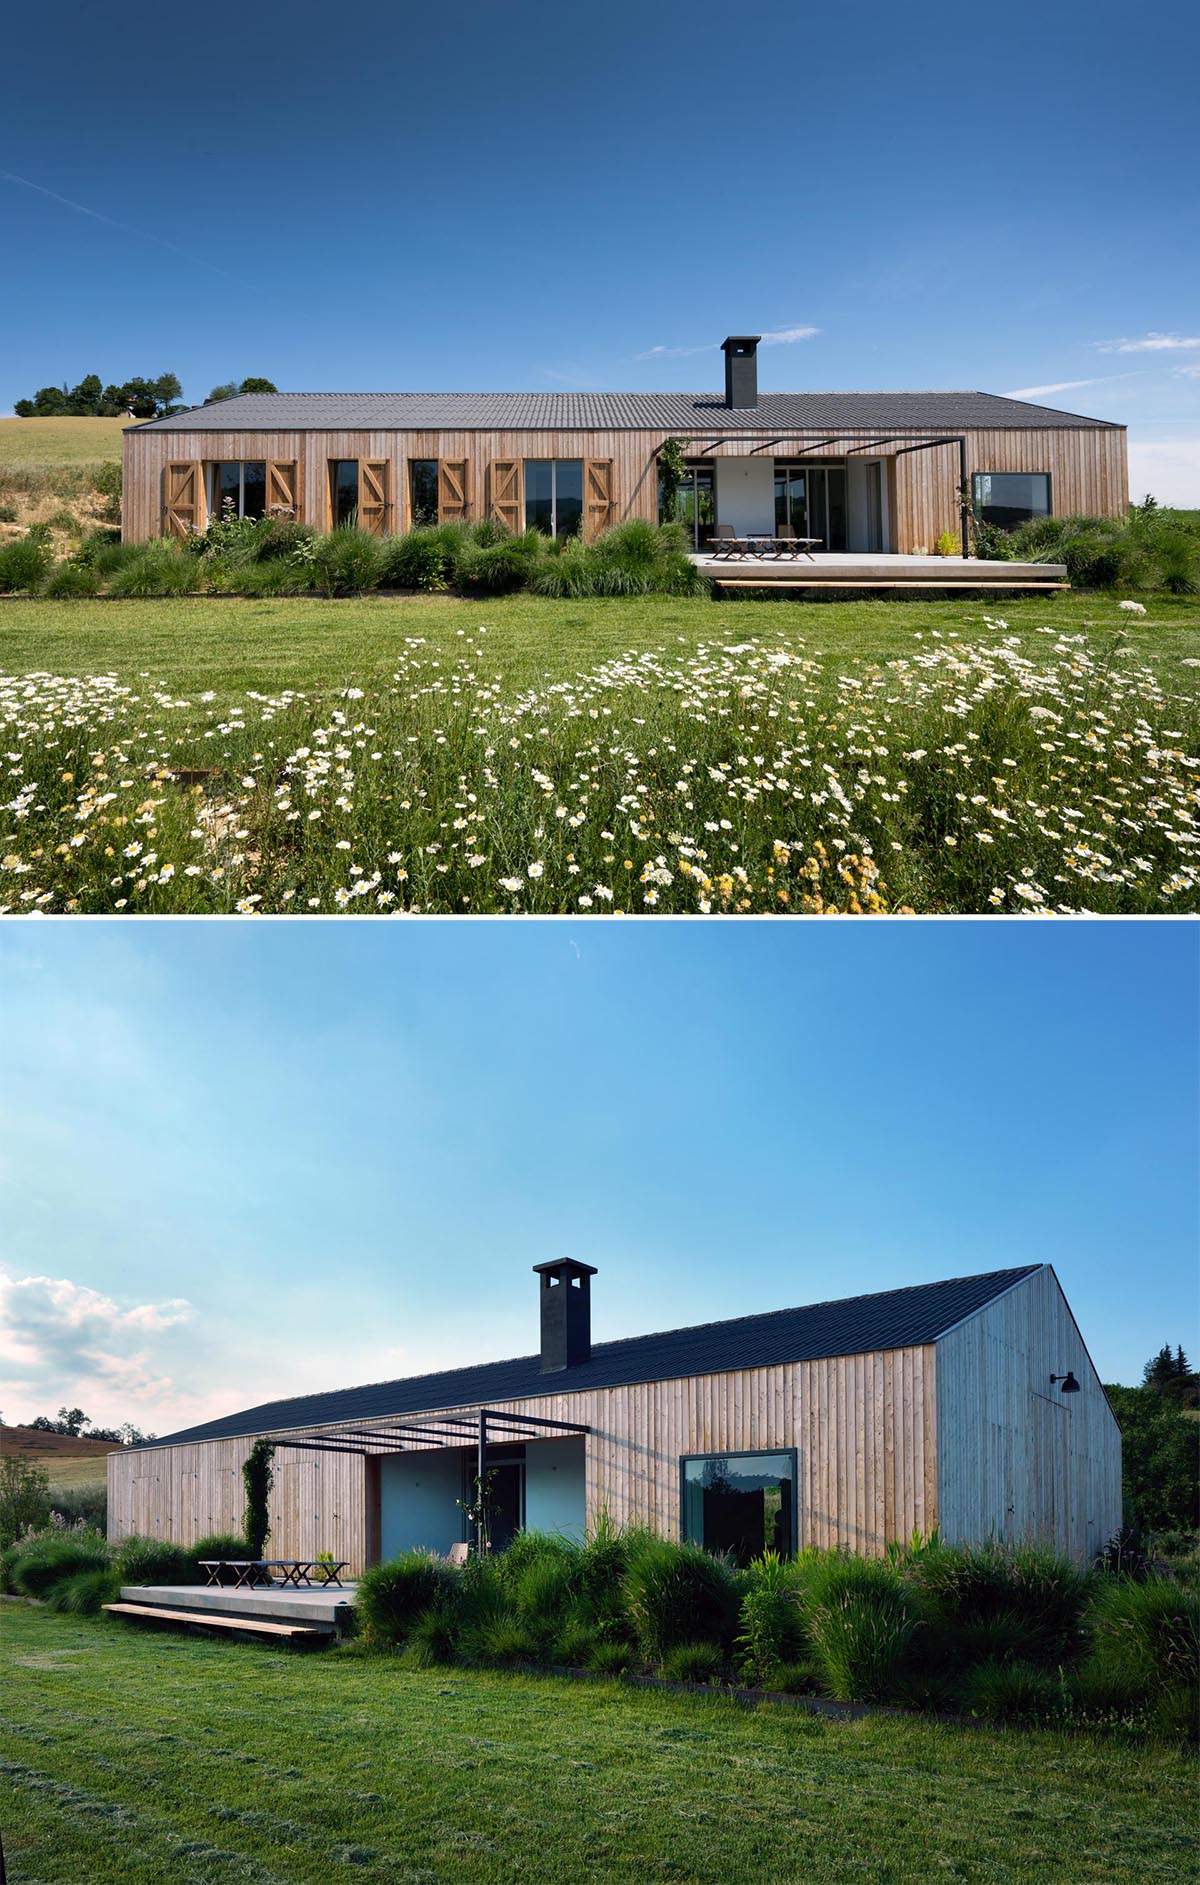 The exterior of this modern farmhouse is clad with natural larch wood and shutters.